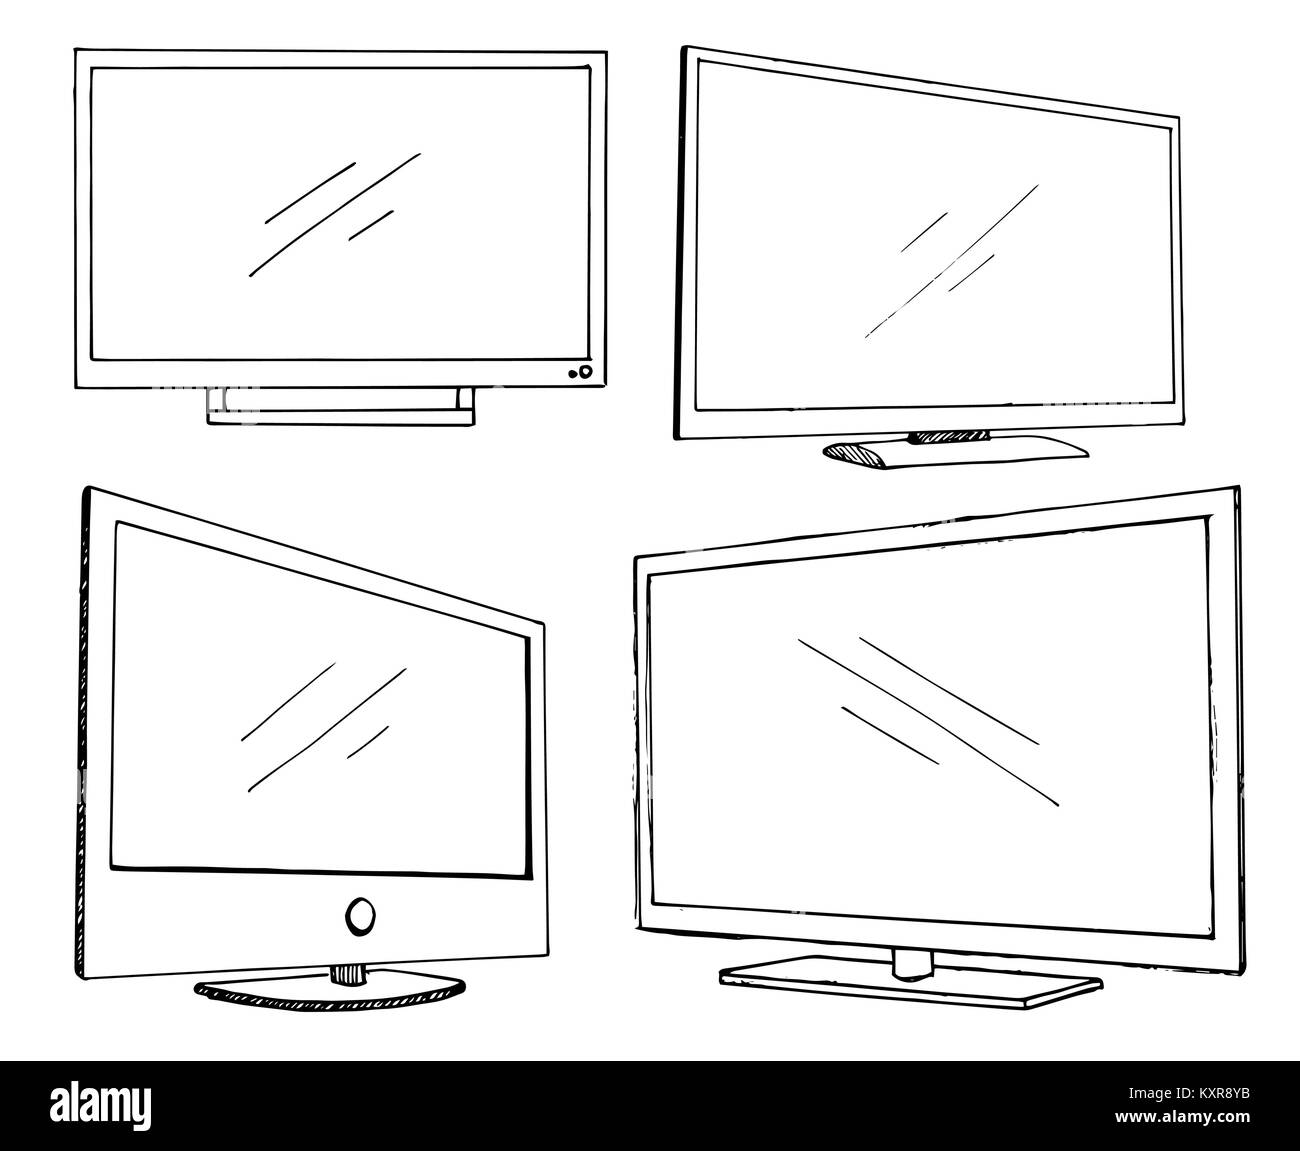 LCD Television Or Computer Monitor. Sketch, Isolated On White Background.  Royalty Free SVG, Cliparts, Vectors, and Stock Illustration. Image  123167655.